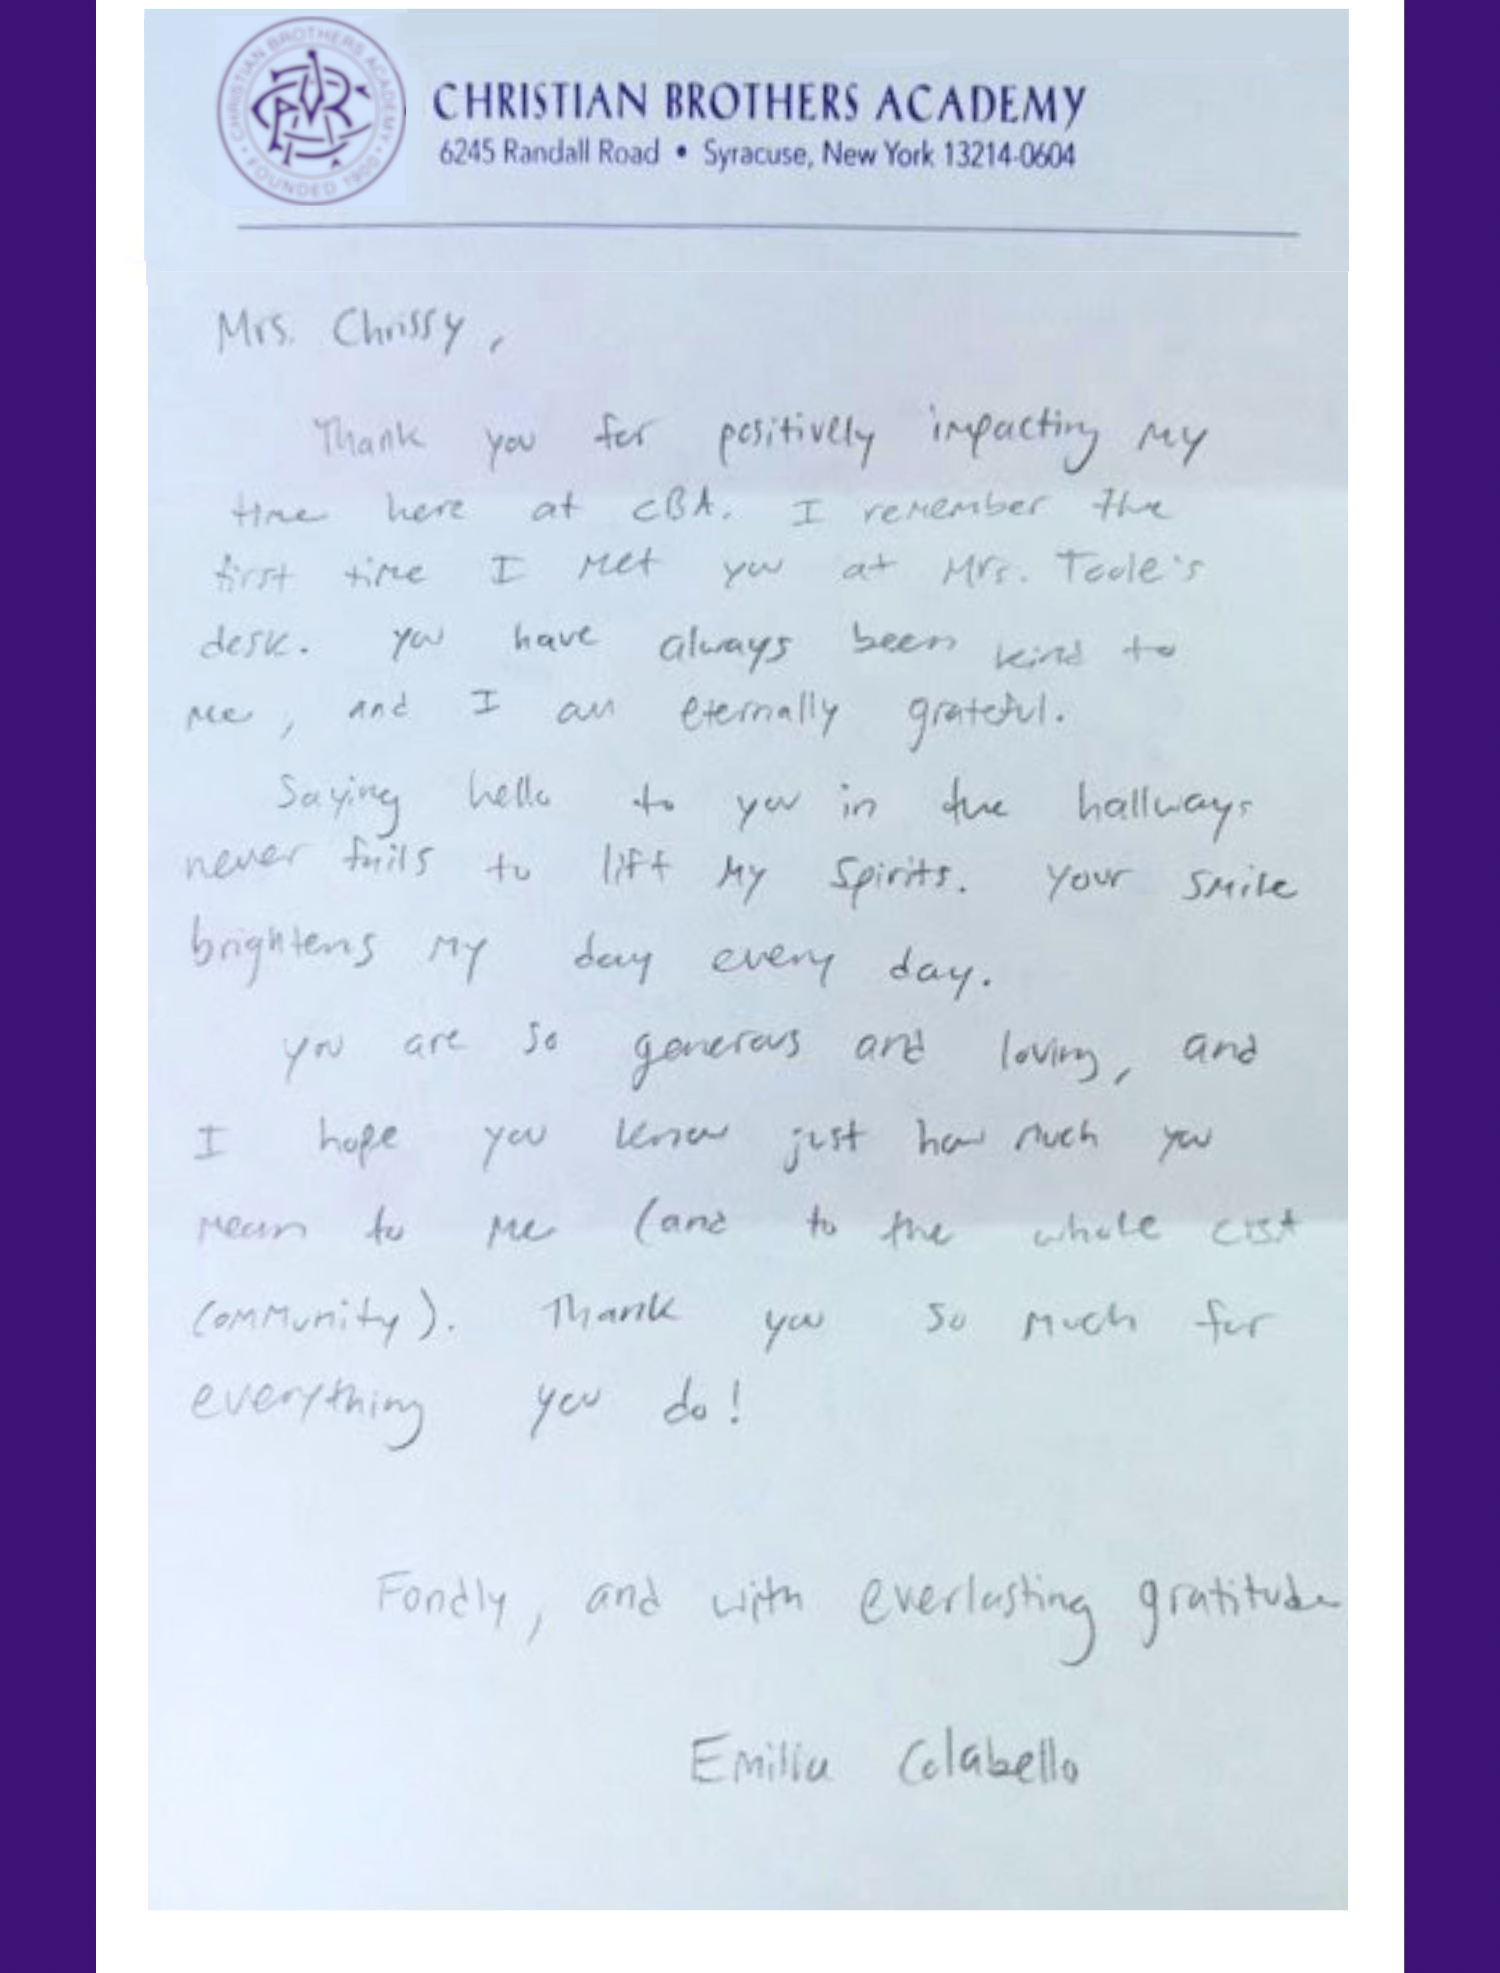 CBA student writes a thoughtful letter to our staff.